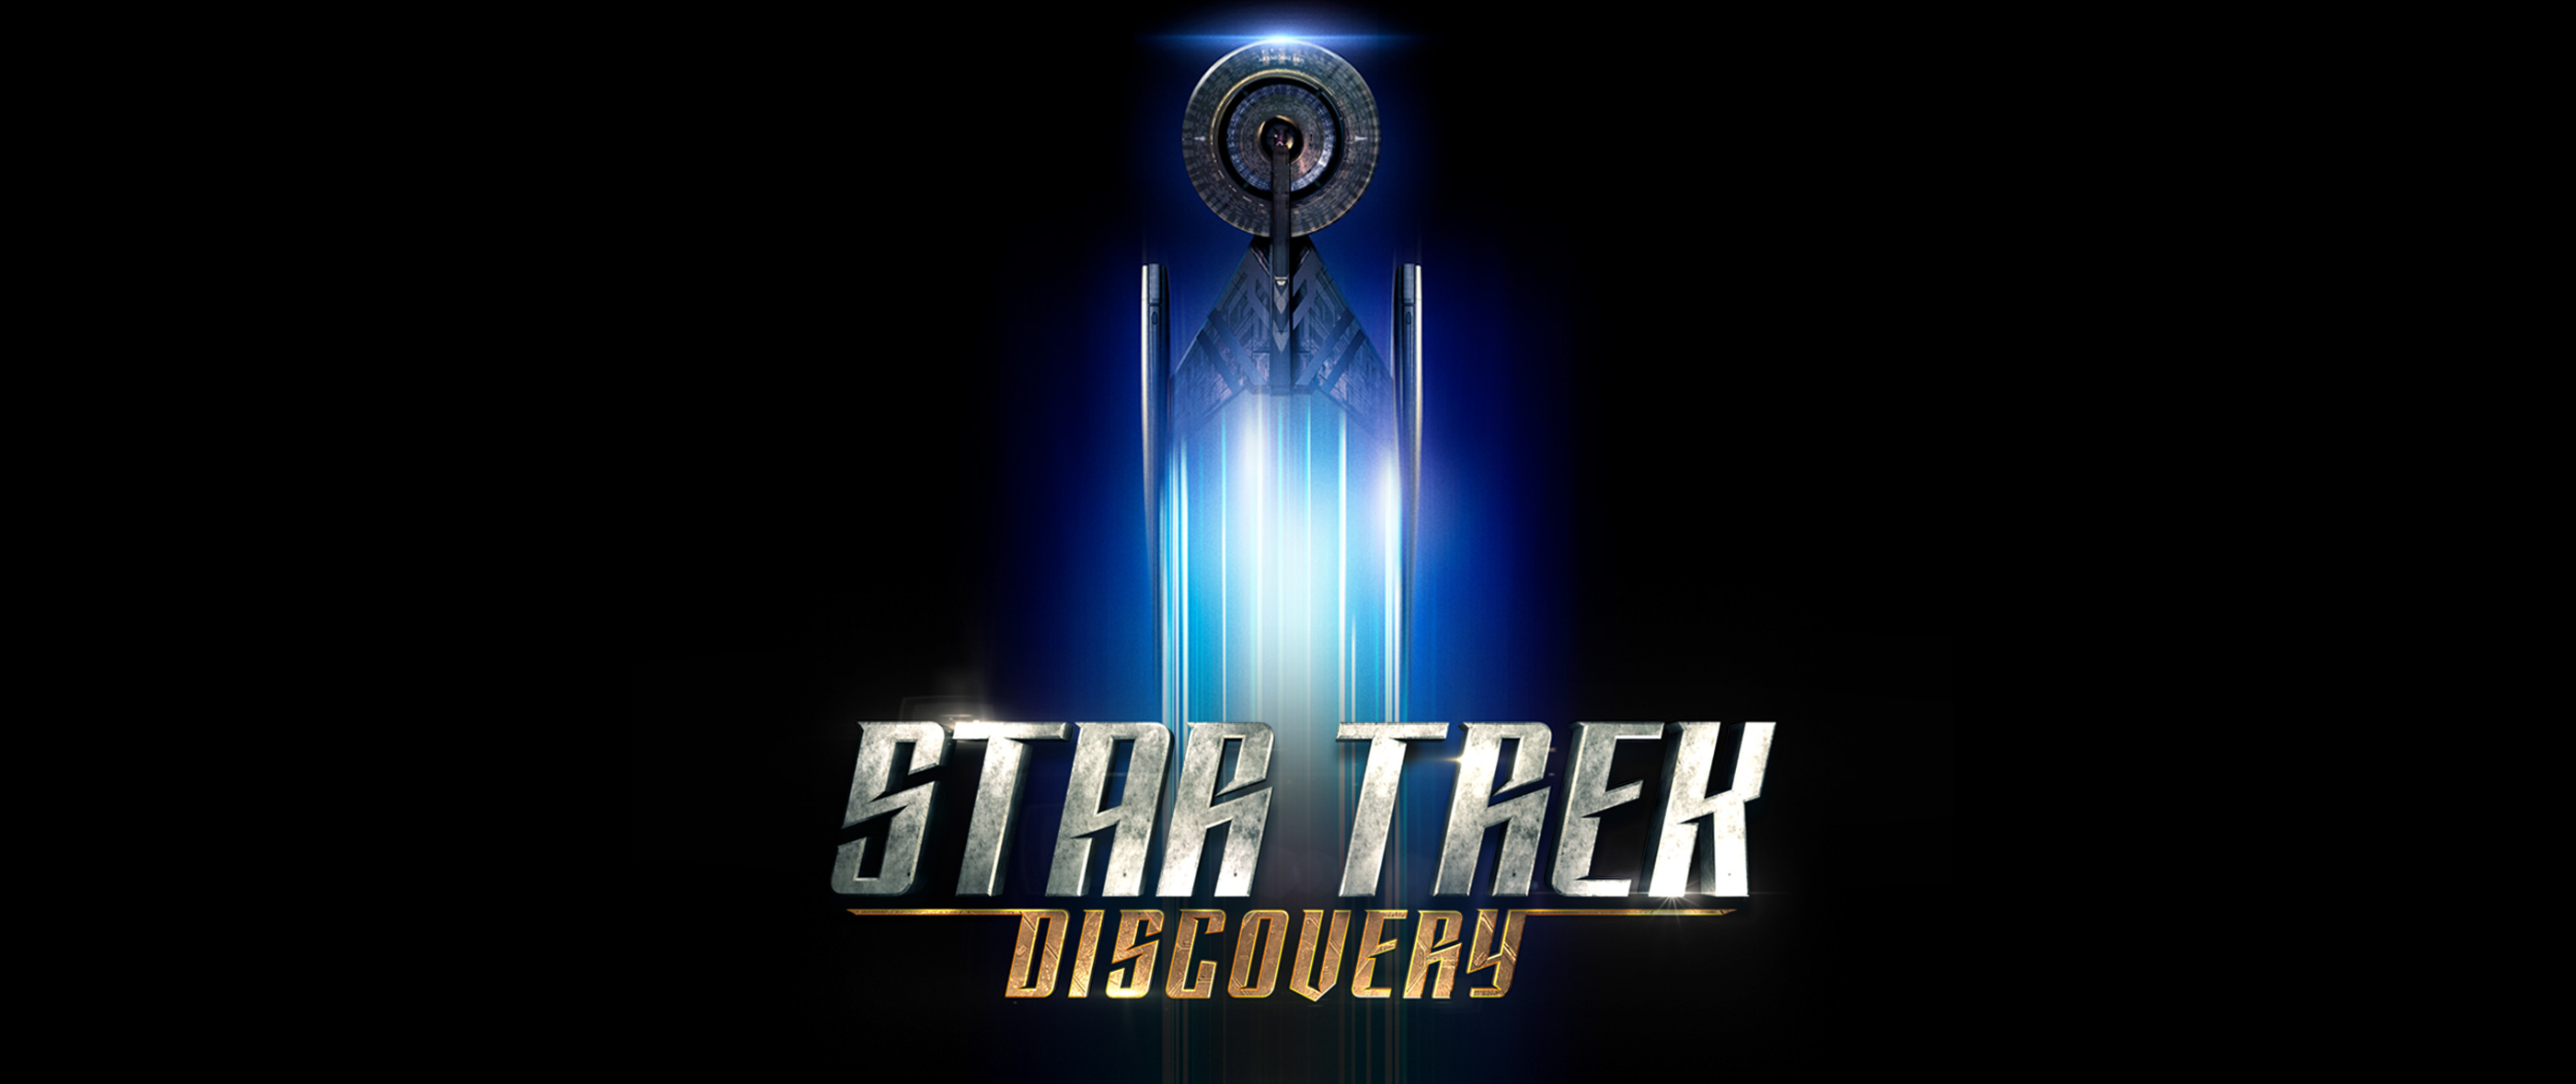 STAR TREK DISCOVERY [Season 1 Review]: "Will You Take My Hand?"